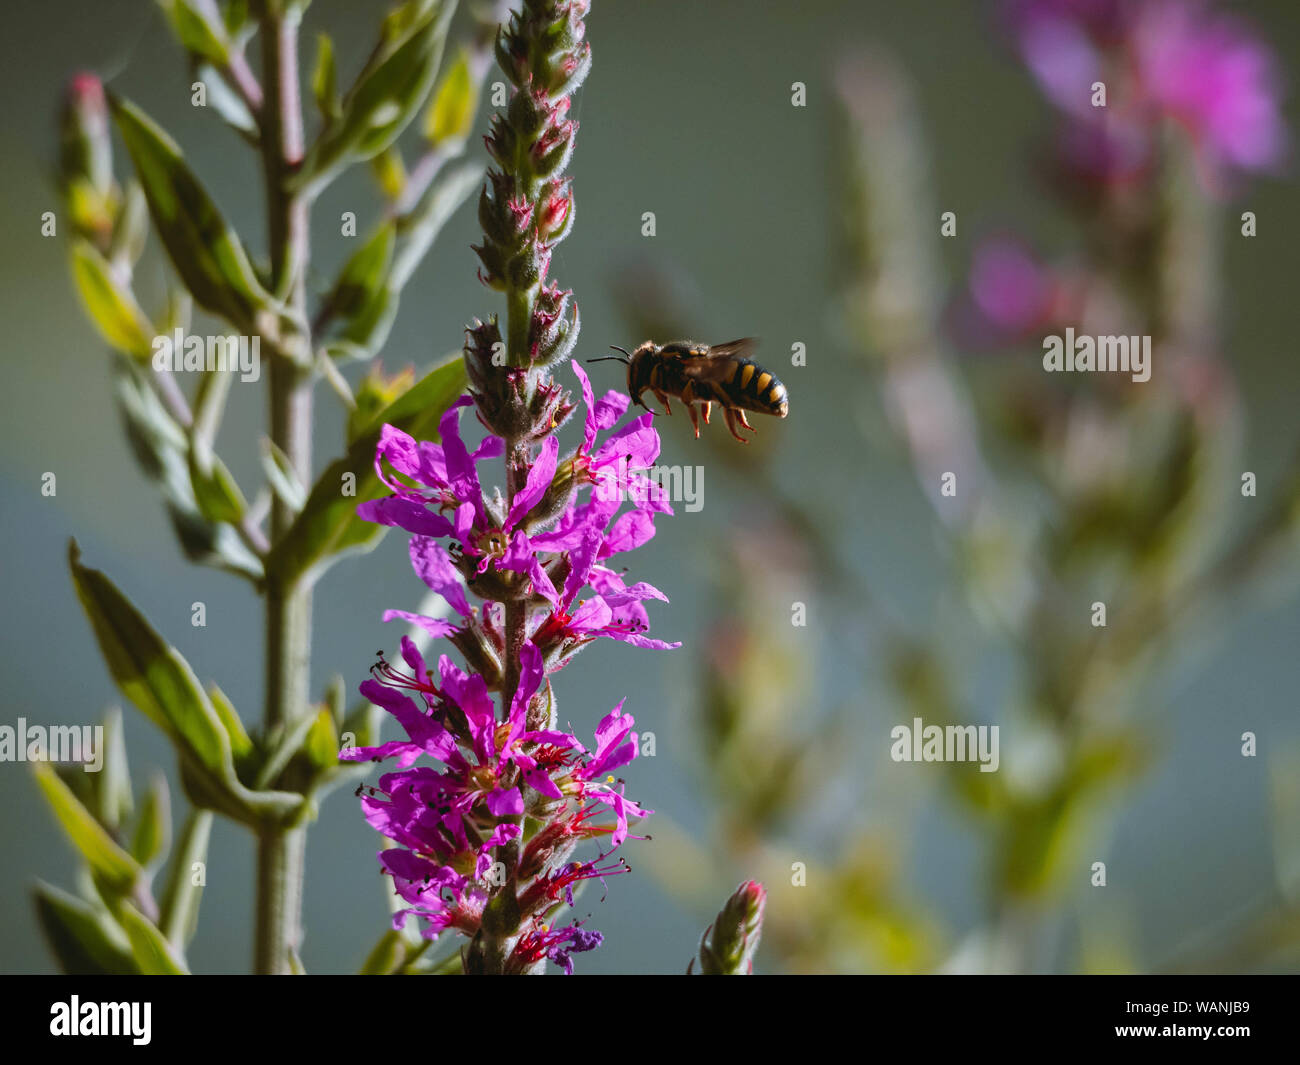 Hornet flying over a plant to eat the nectar and pollinate it Stock Photo